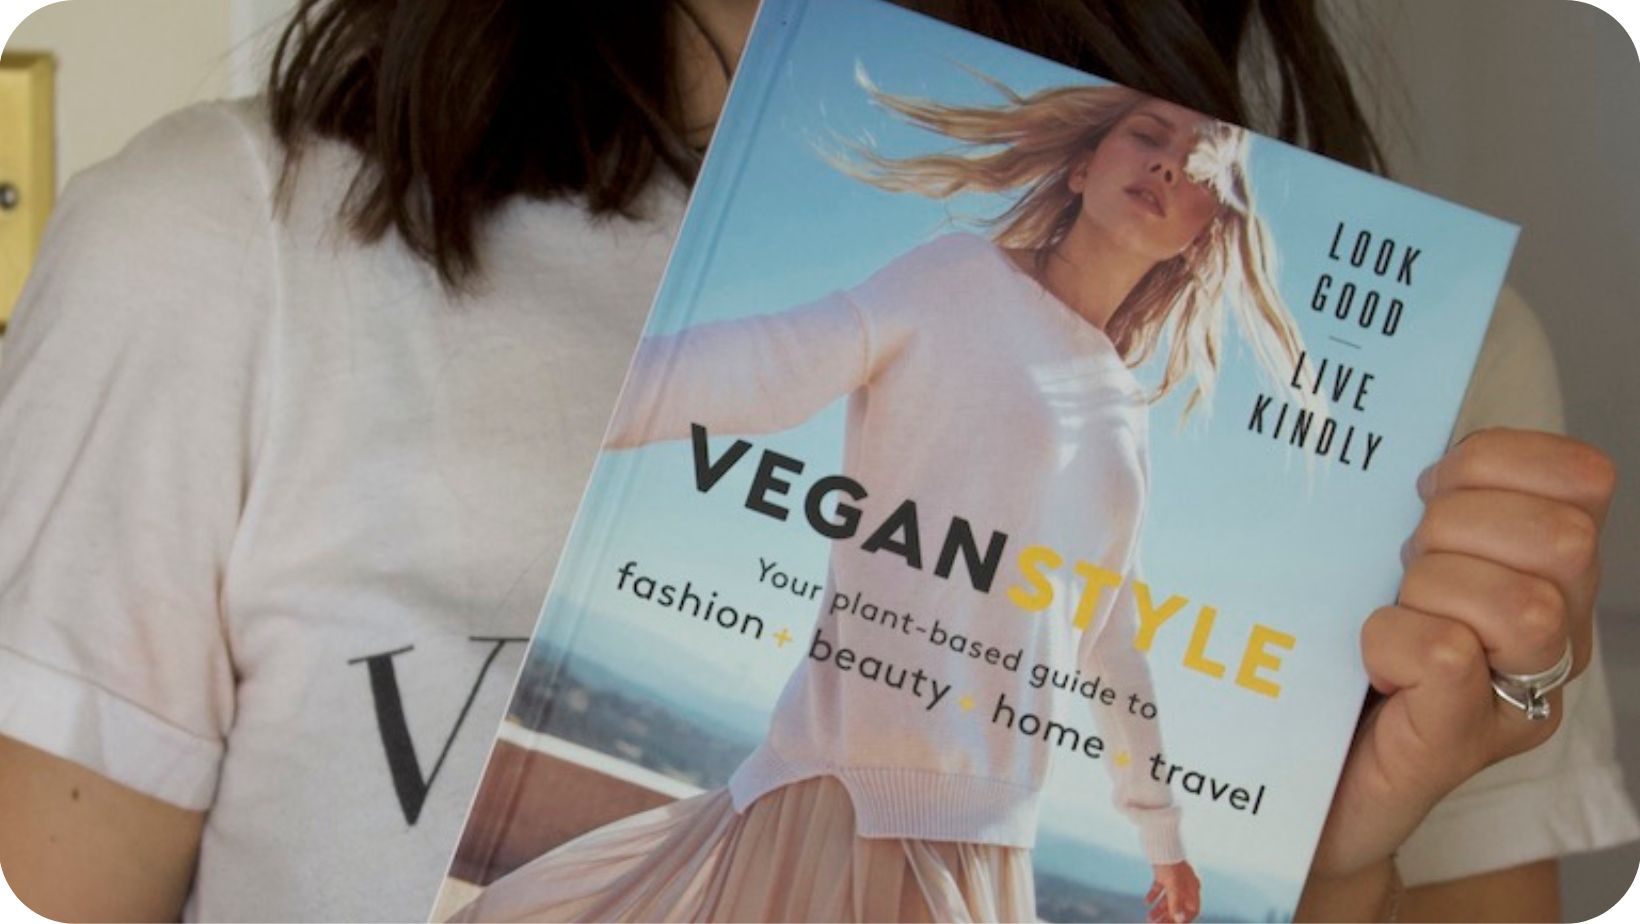 Woman (Sascha Camilli) holding  up her book Vegan Style in front of her